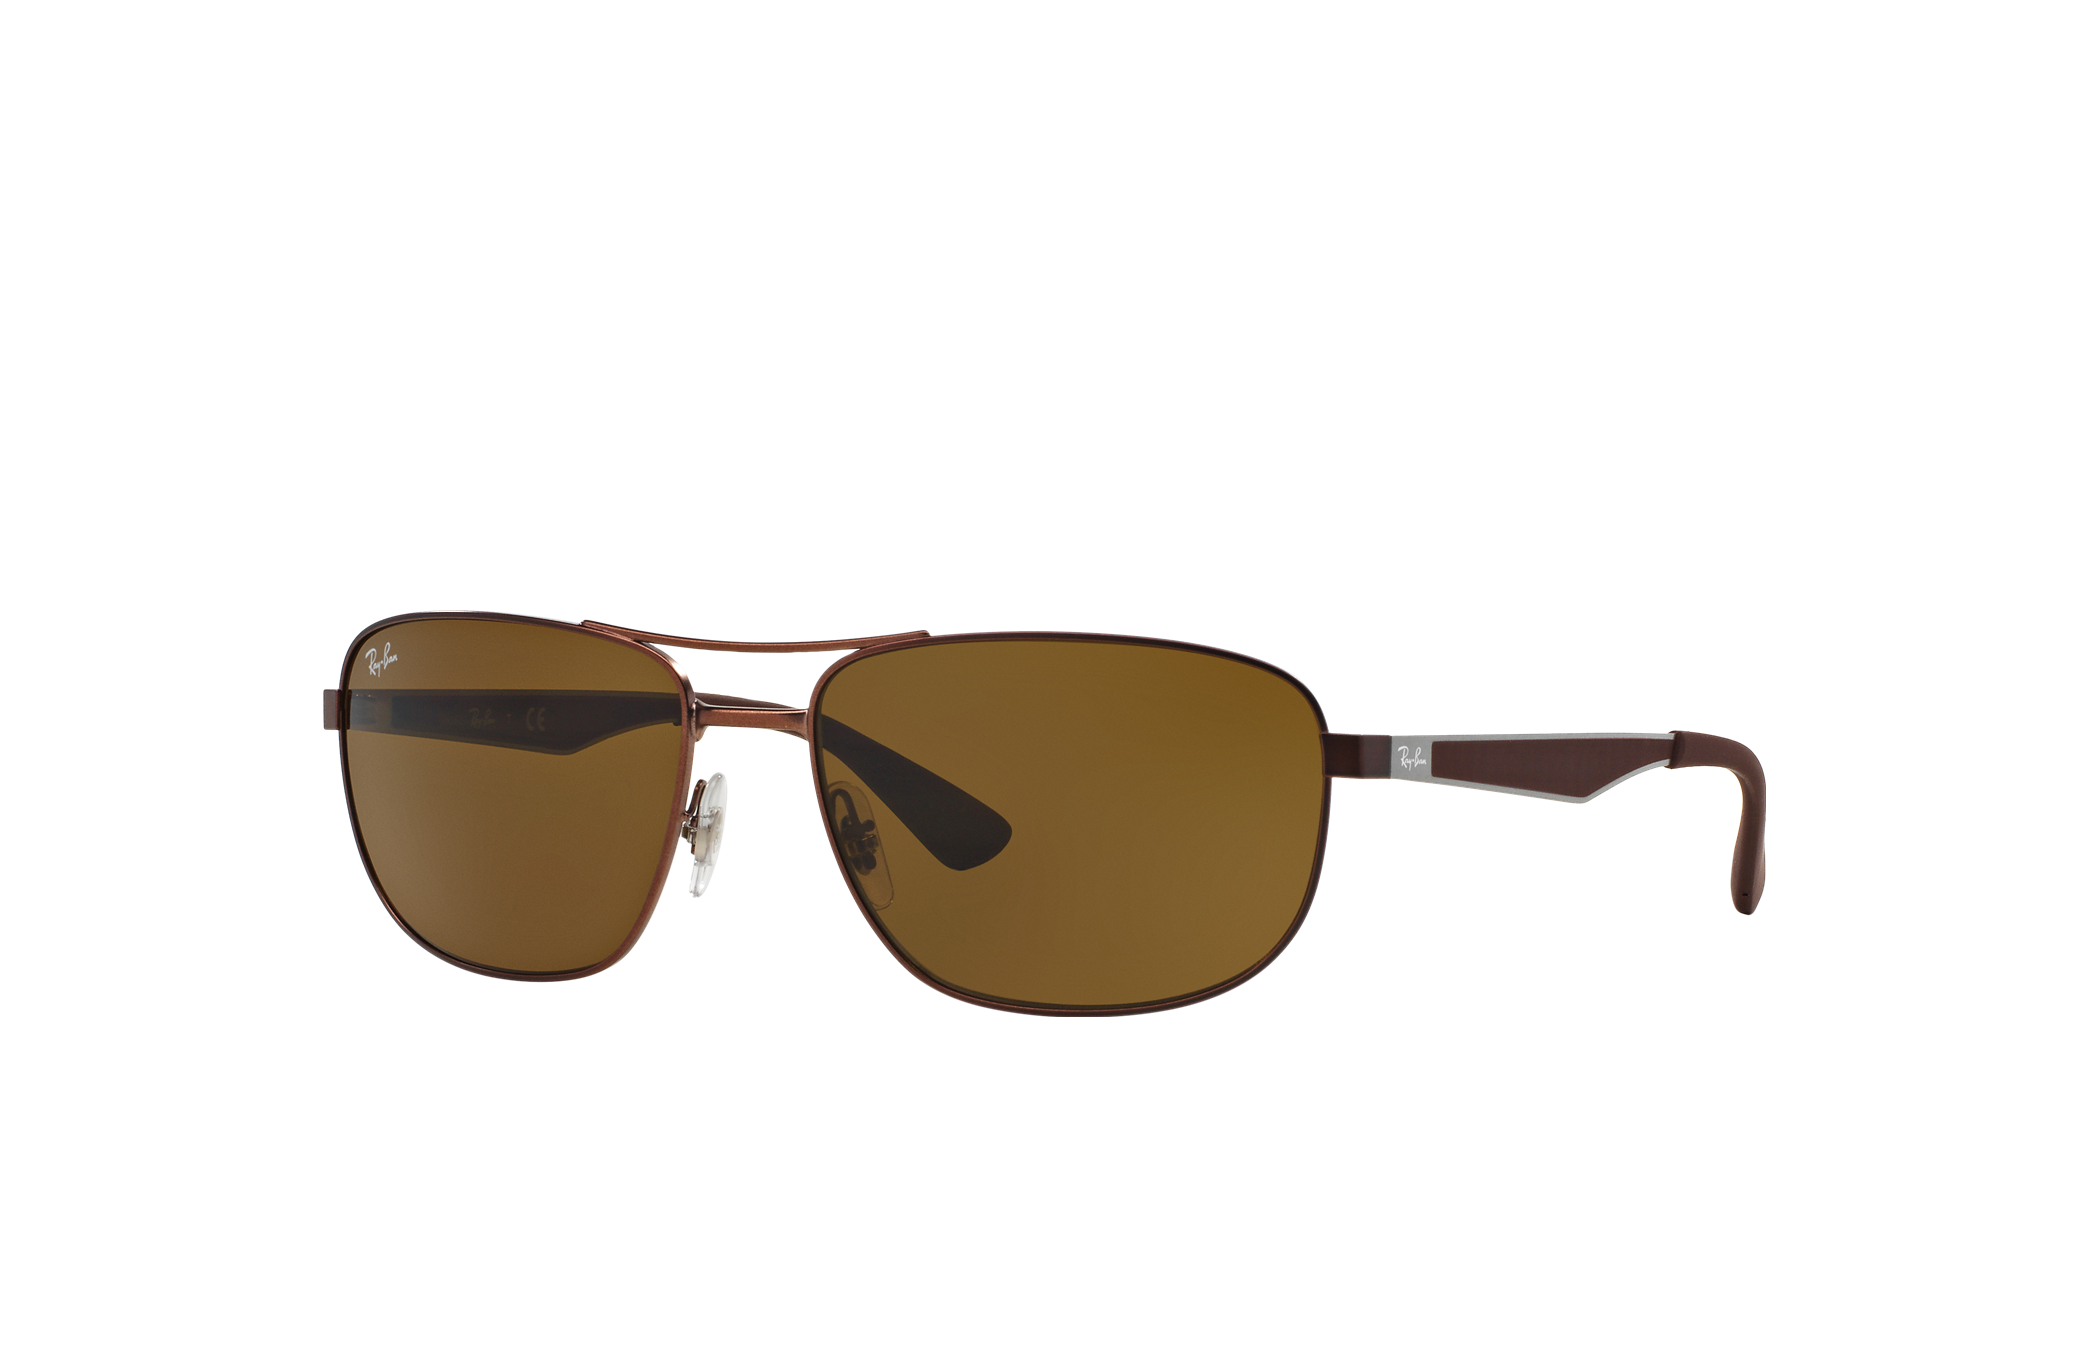 Rb3528 Sunglasses in Brown and Brown - RB3528 | Ray-Ban®